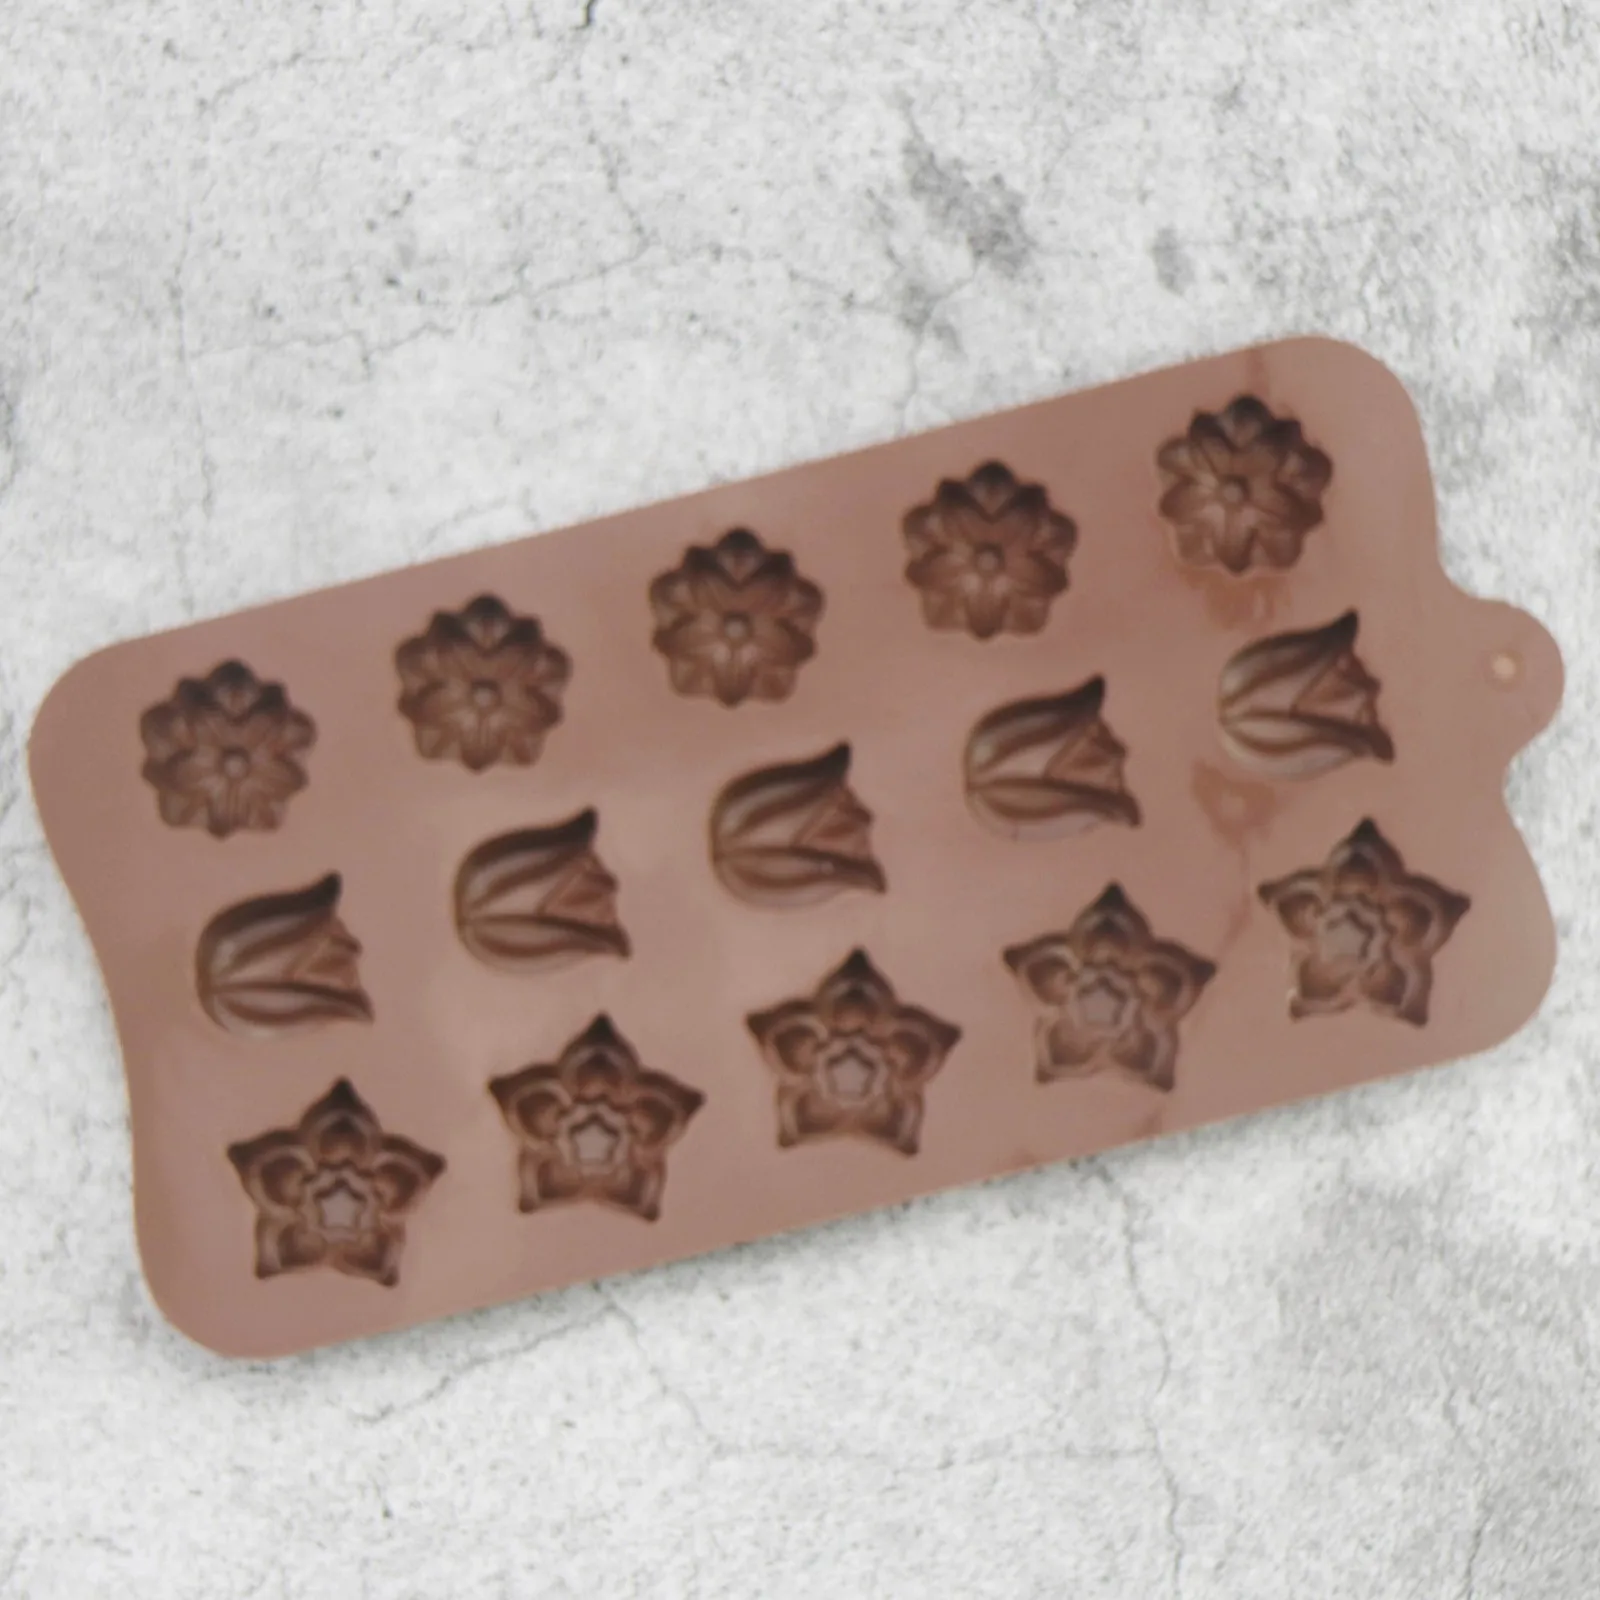 https://ae01.alicdn.com/kf/H530c9864cf514692a9381cea0fd8b8b0z/Silicone-Mold-Chocolate-flower-Candy-Molds-Silicone-Baking-Molds-for-Cake-Fancy-Shapes-Non-stick-Kitchen.jpg